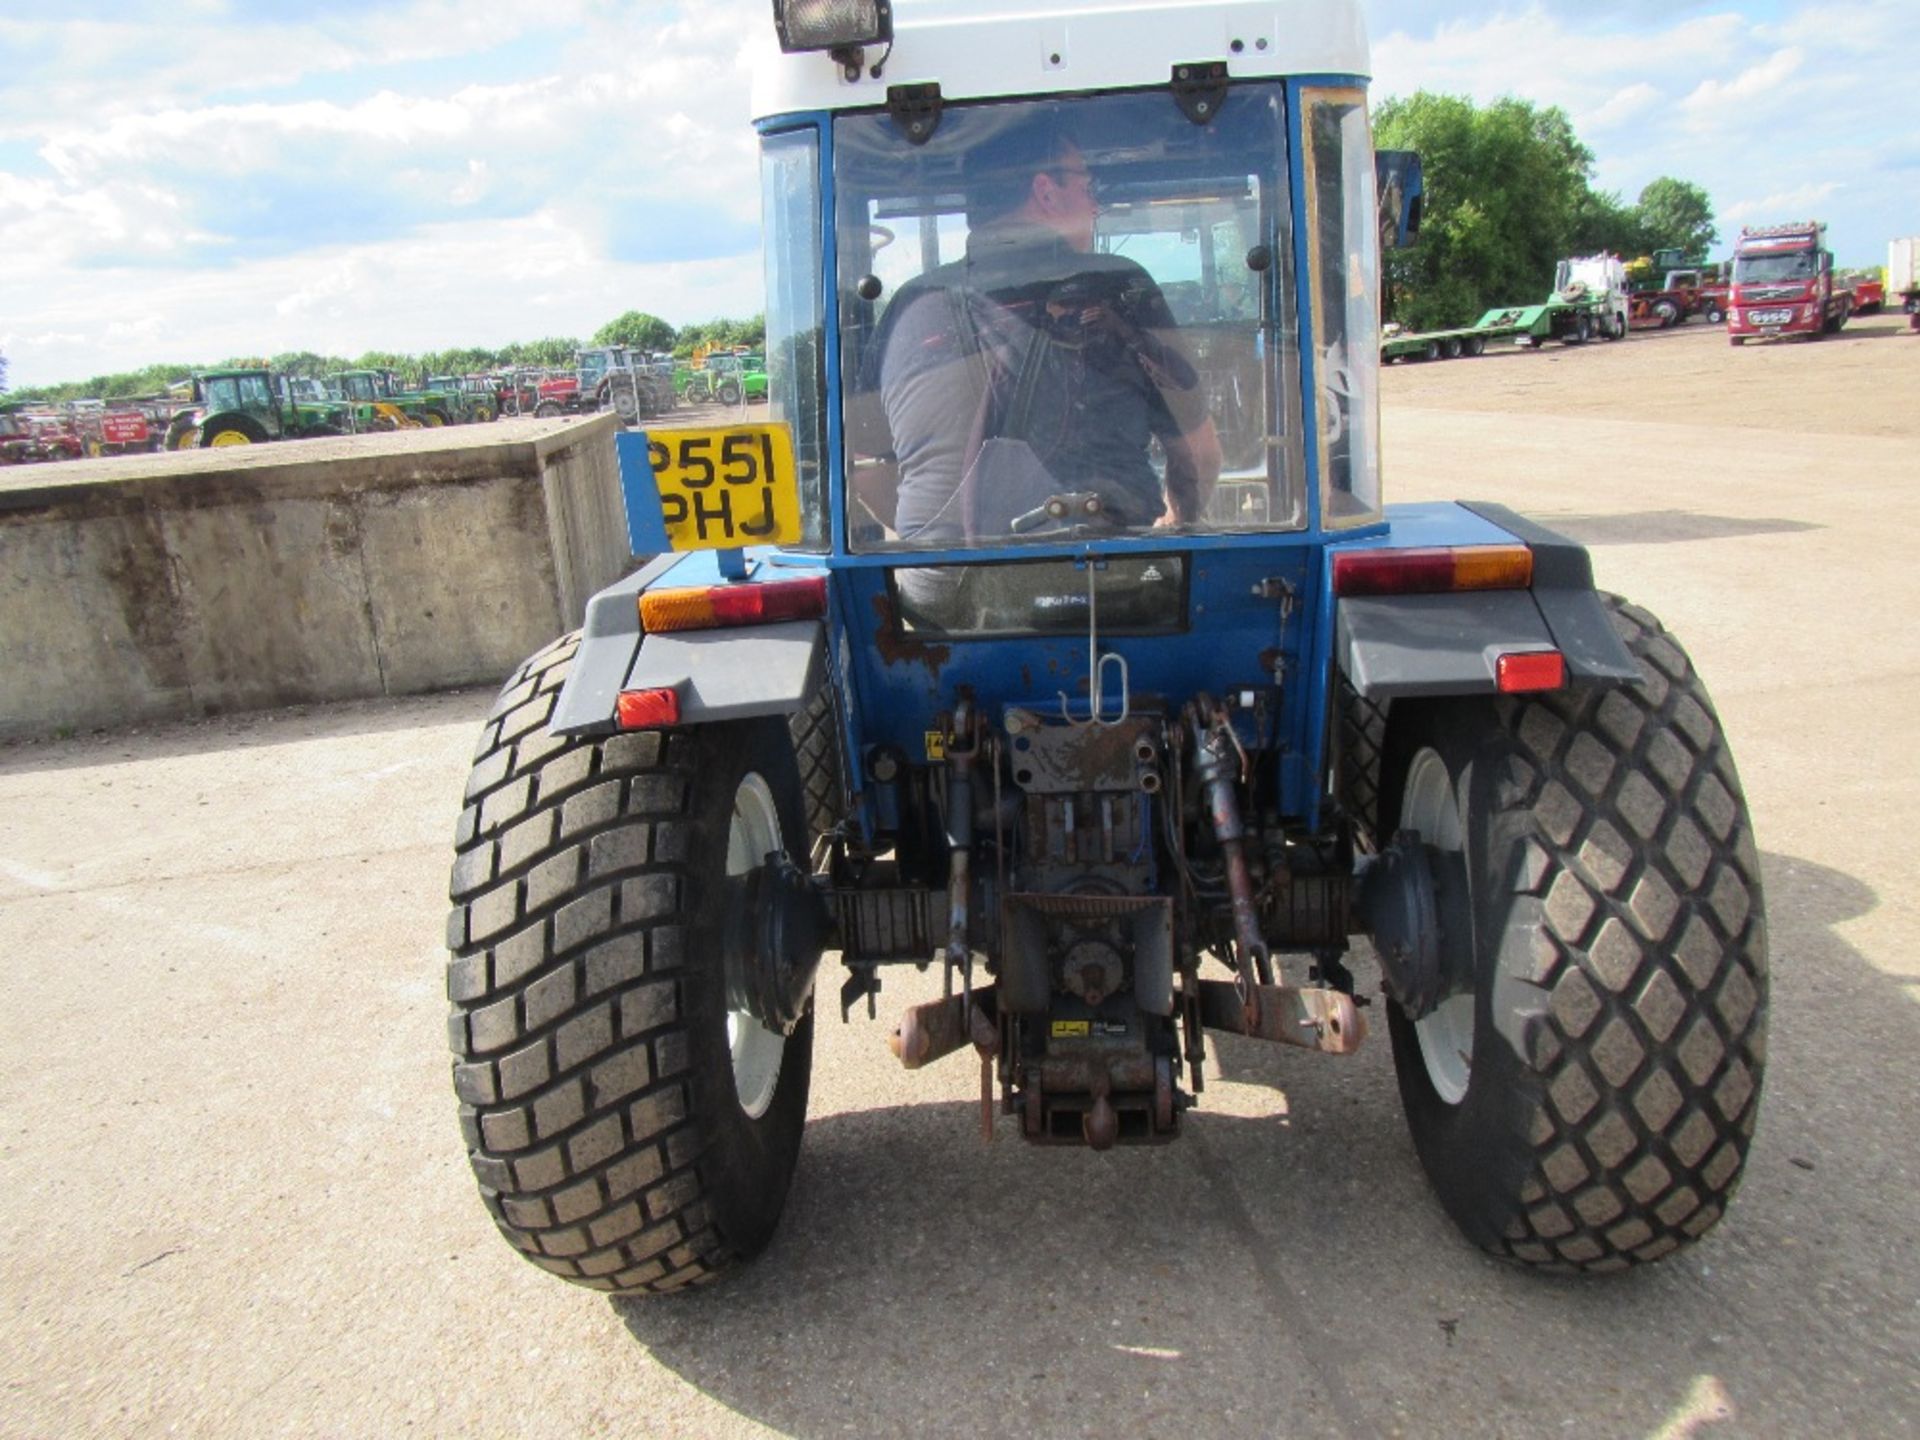 New Holland 4135 4wd Tractor with Grass Tyres Reg. No. P551 PHJ - Image 6 of 12